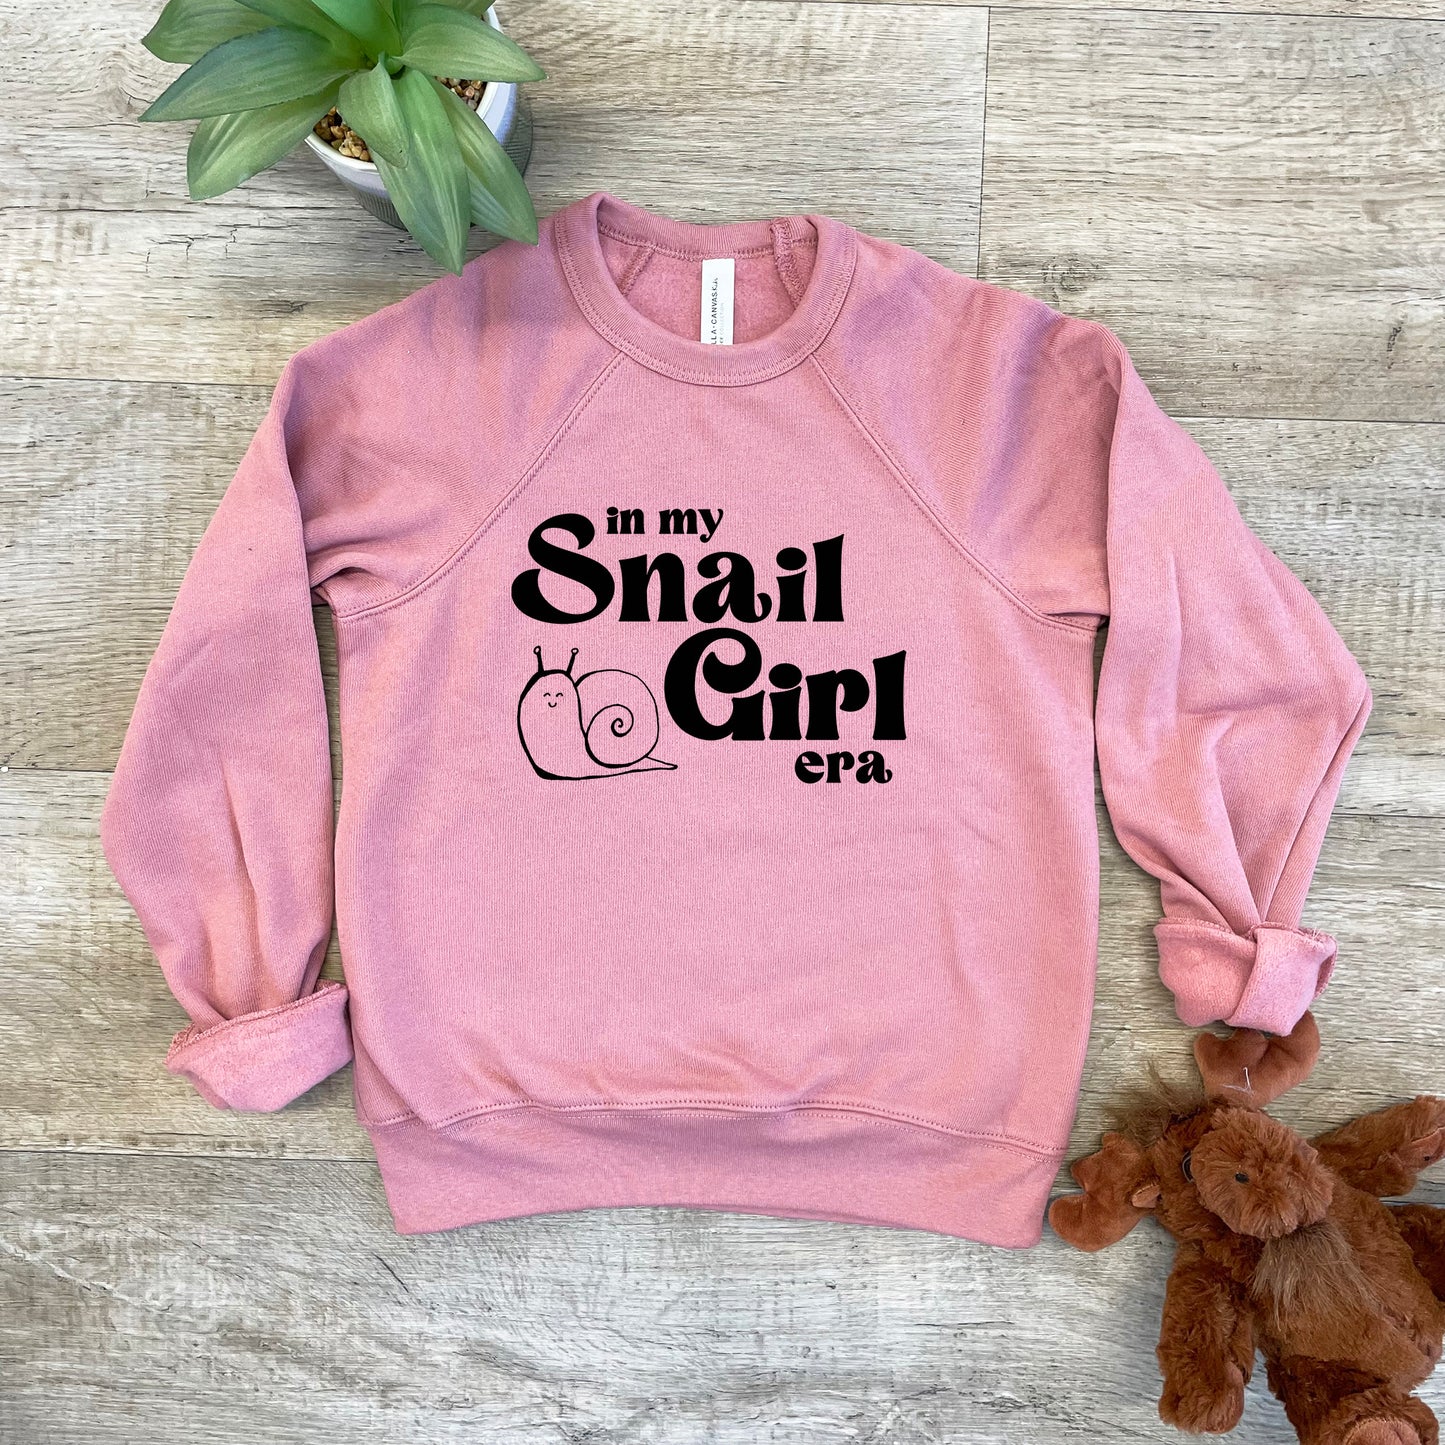 a pink sweatshirt that says in my snail girl